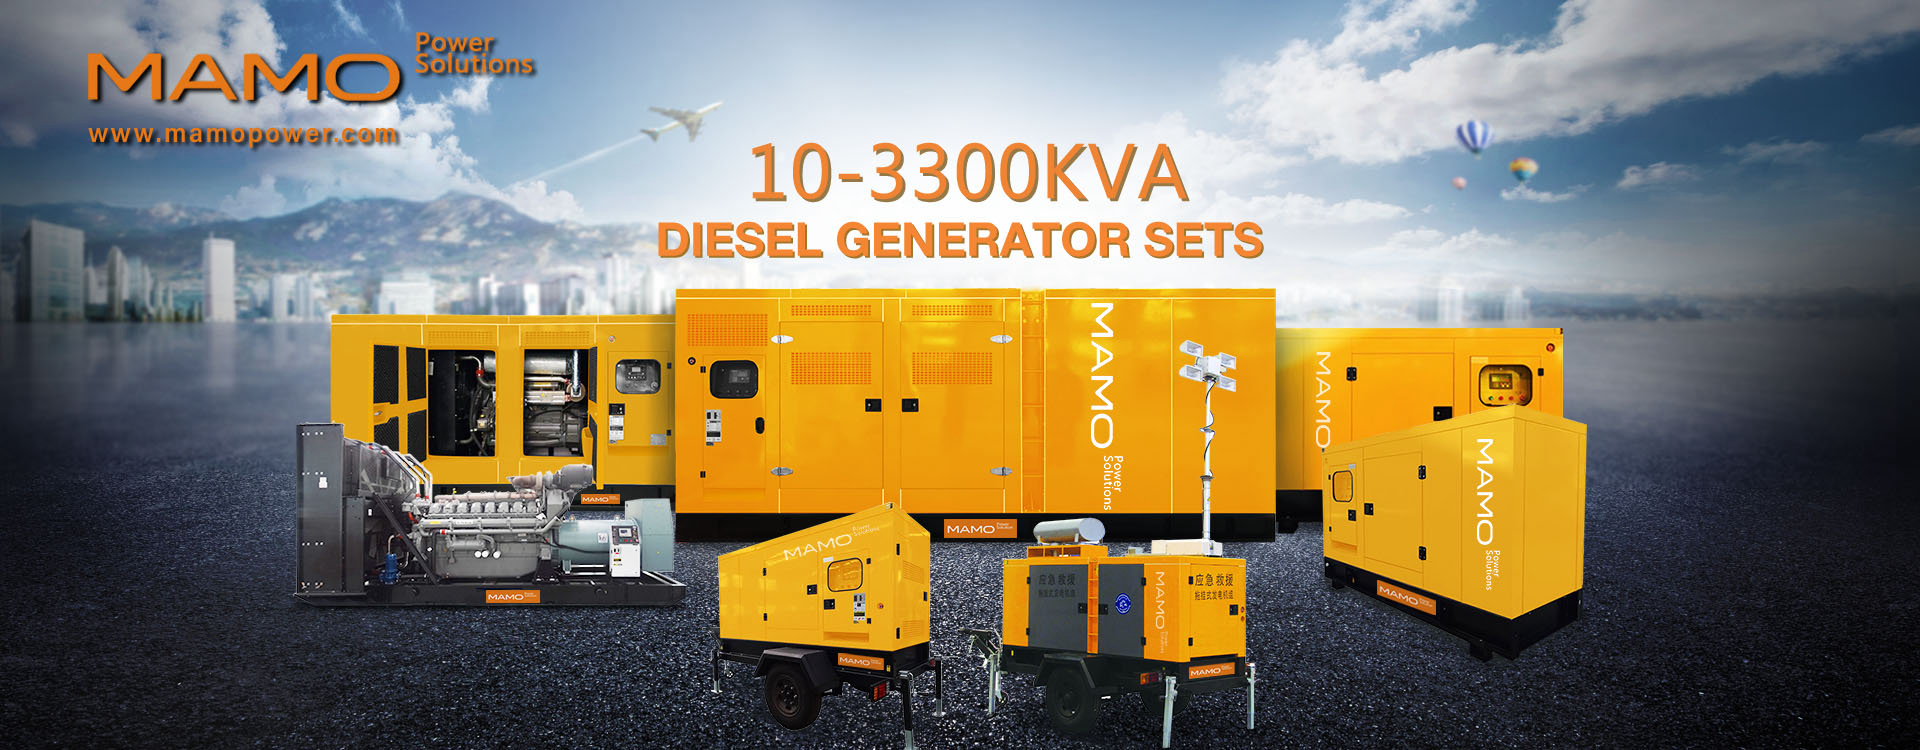 Introduction to the precautions of diesel generator set in summer.